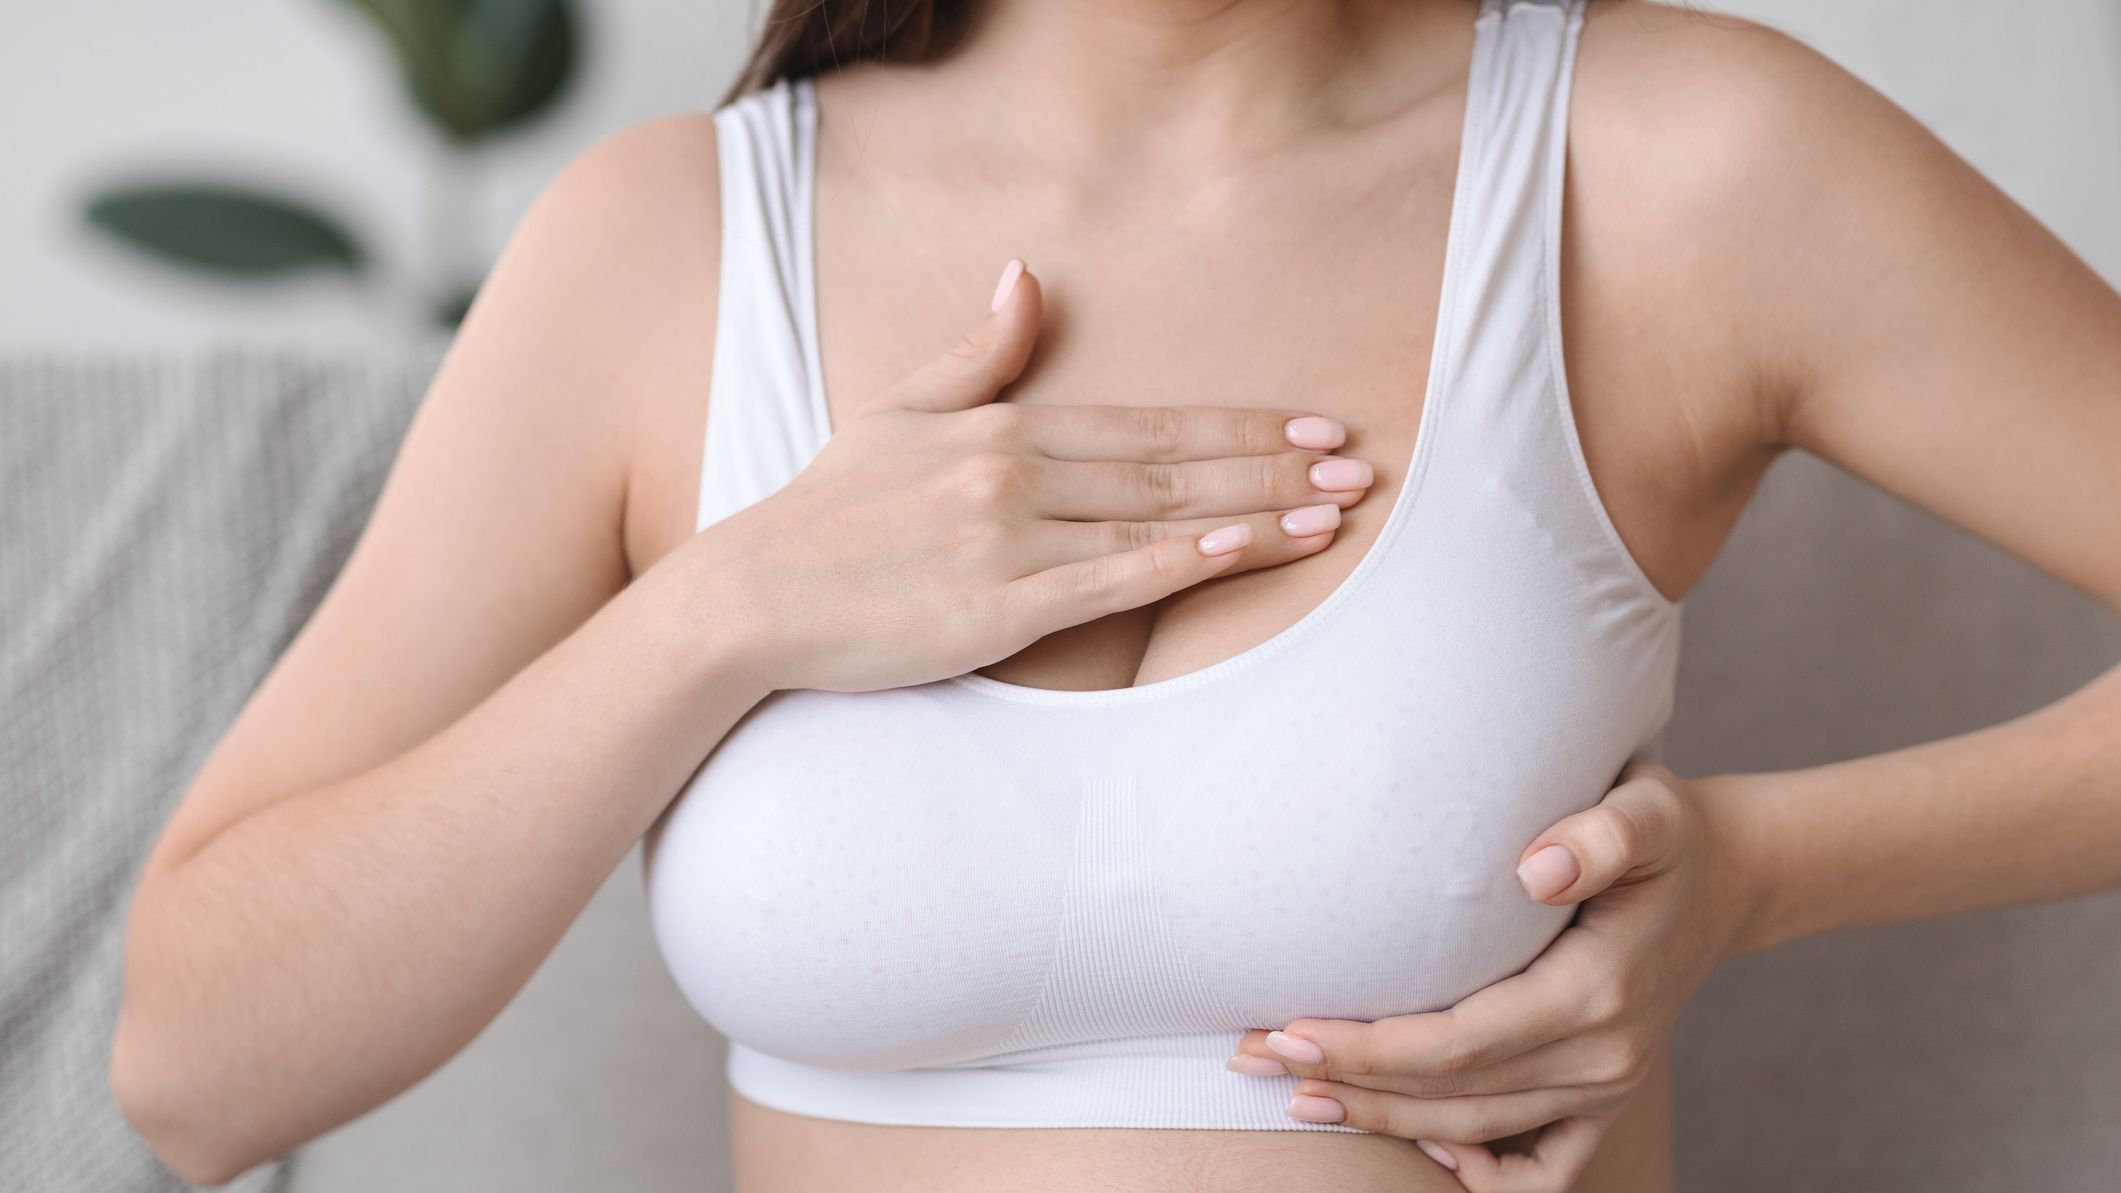 How To Lose Weight In Breast? - Ninja Quest Fitness